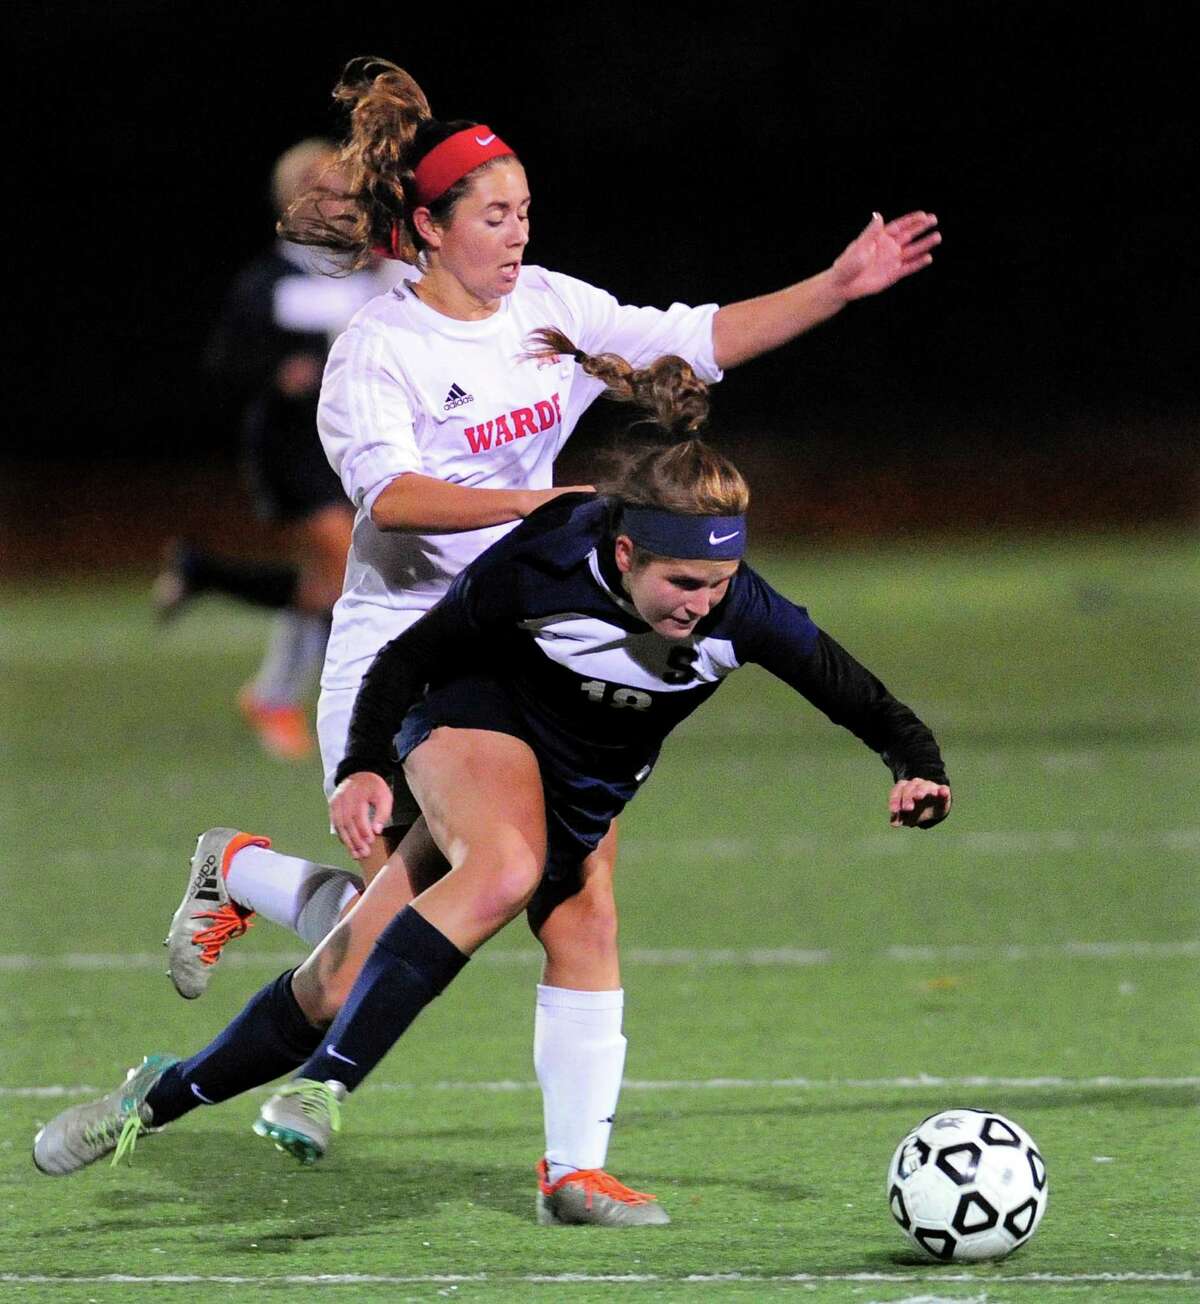 Staples Morgan McWhirter falls in front of Fairfield Warde's Alexa Montani during girls soccer action in Fairfield, Conn., on Tuesday Oct. 25, 2016.